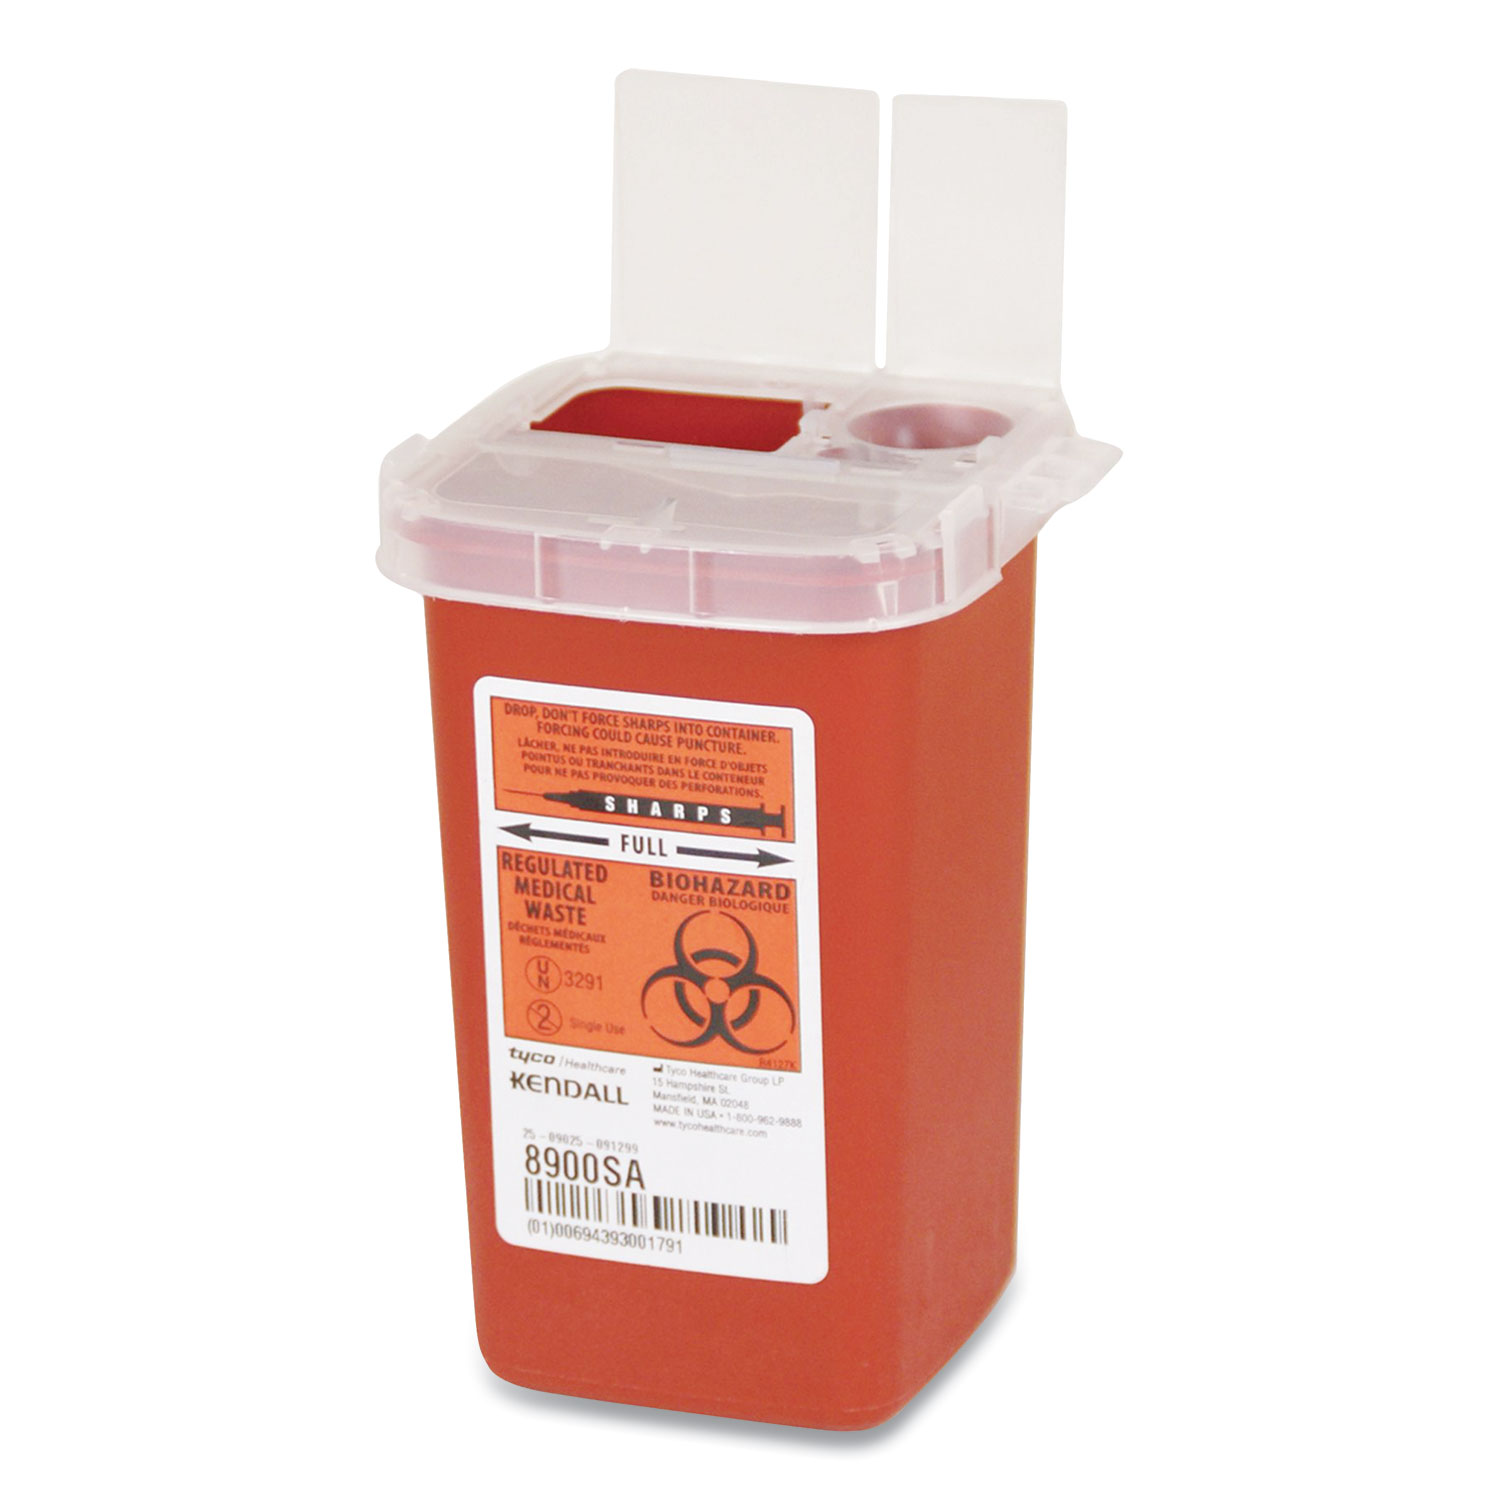  Covidien SR1Q100900 Sharps Containers, Polypropylene, 1 qt, Red, 10/Box (UMI1955111) 